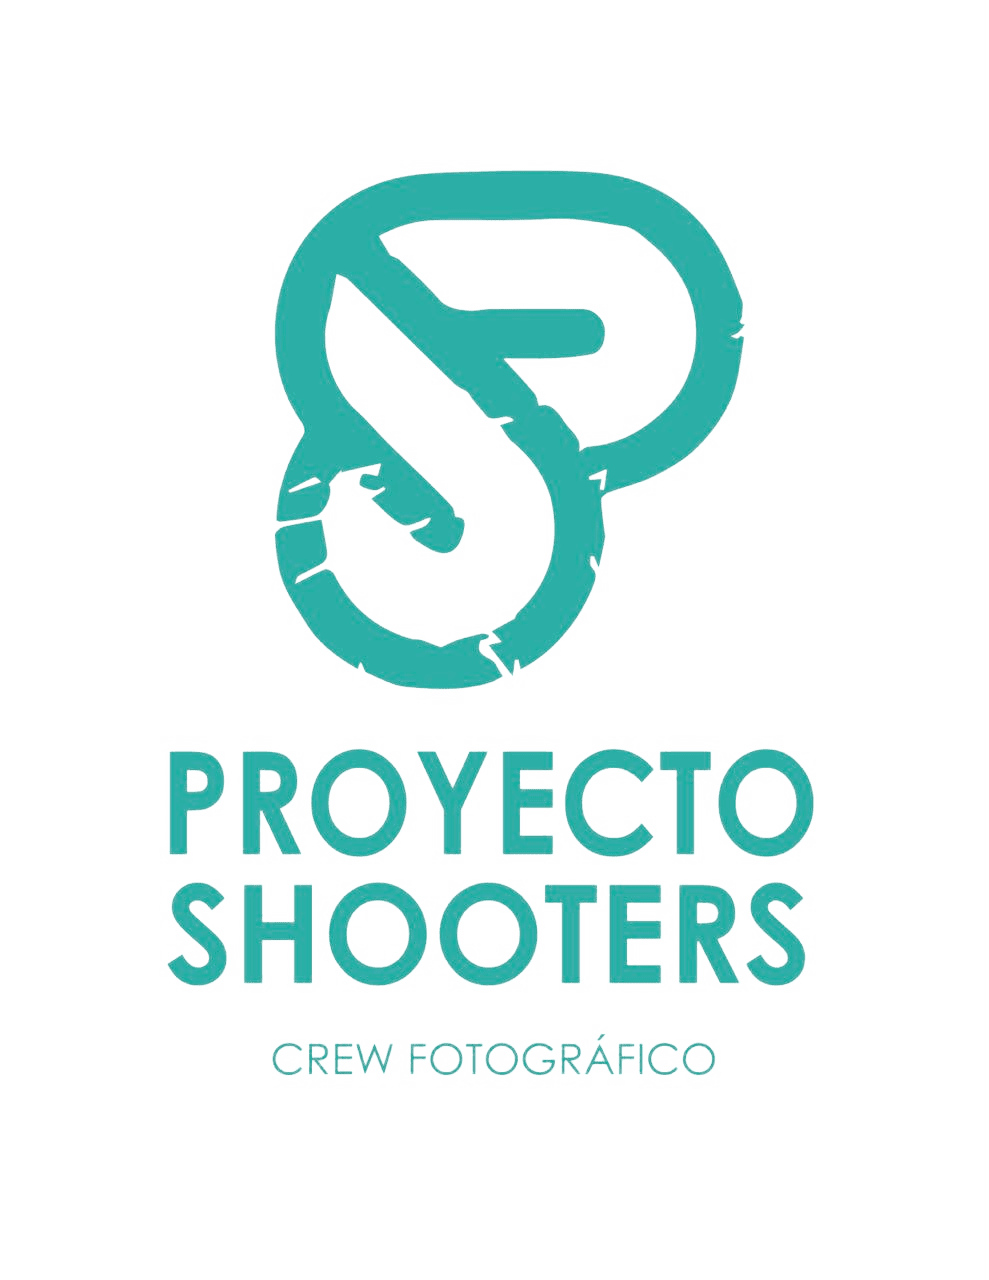 Proyecto Shooters